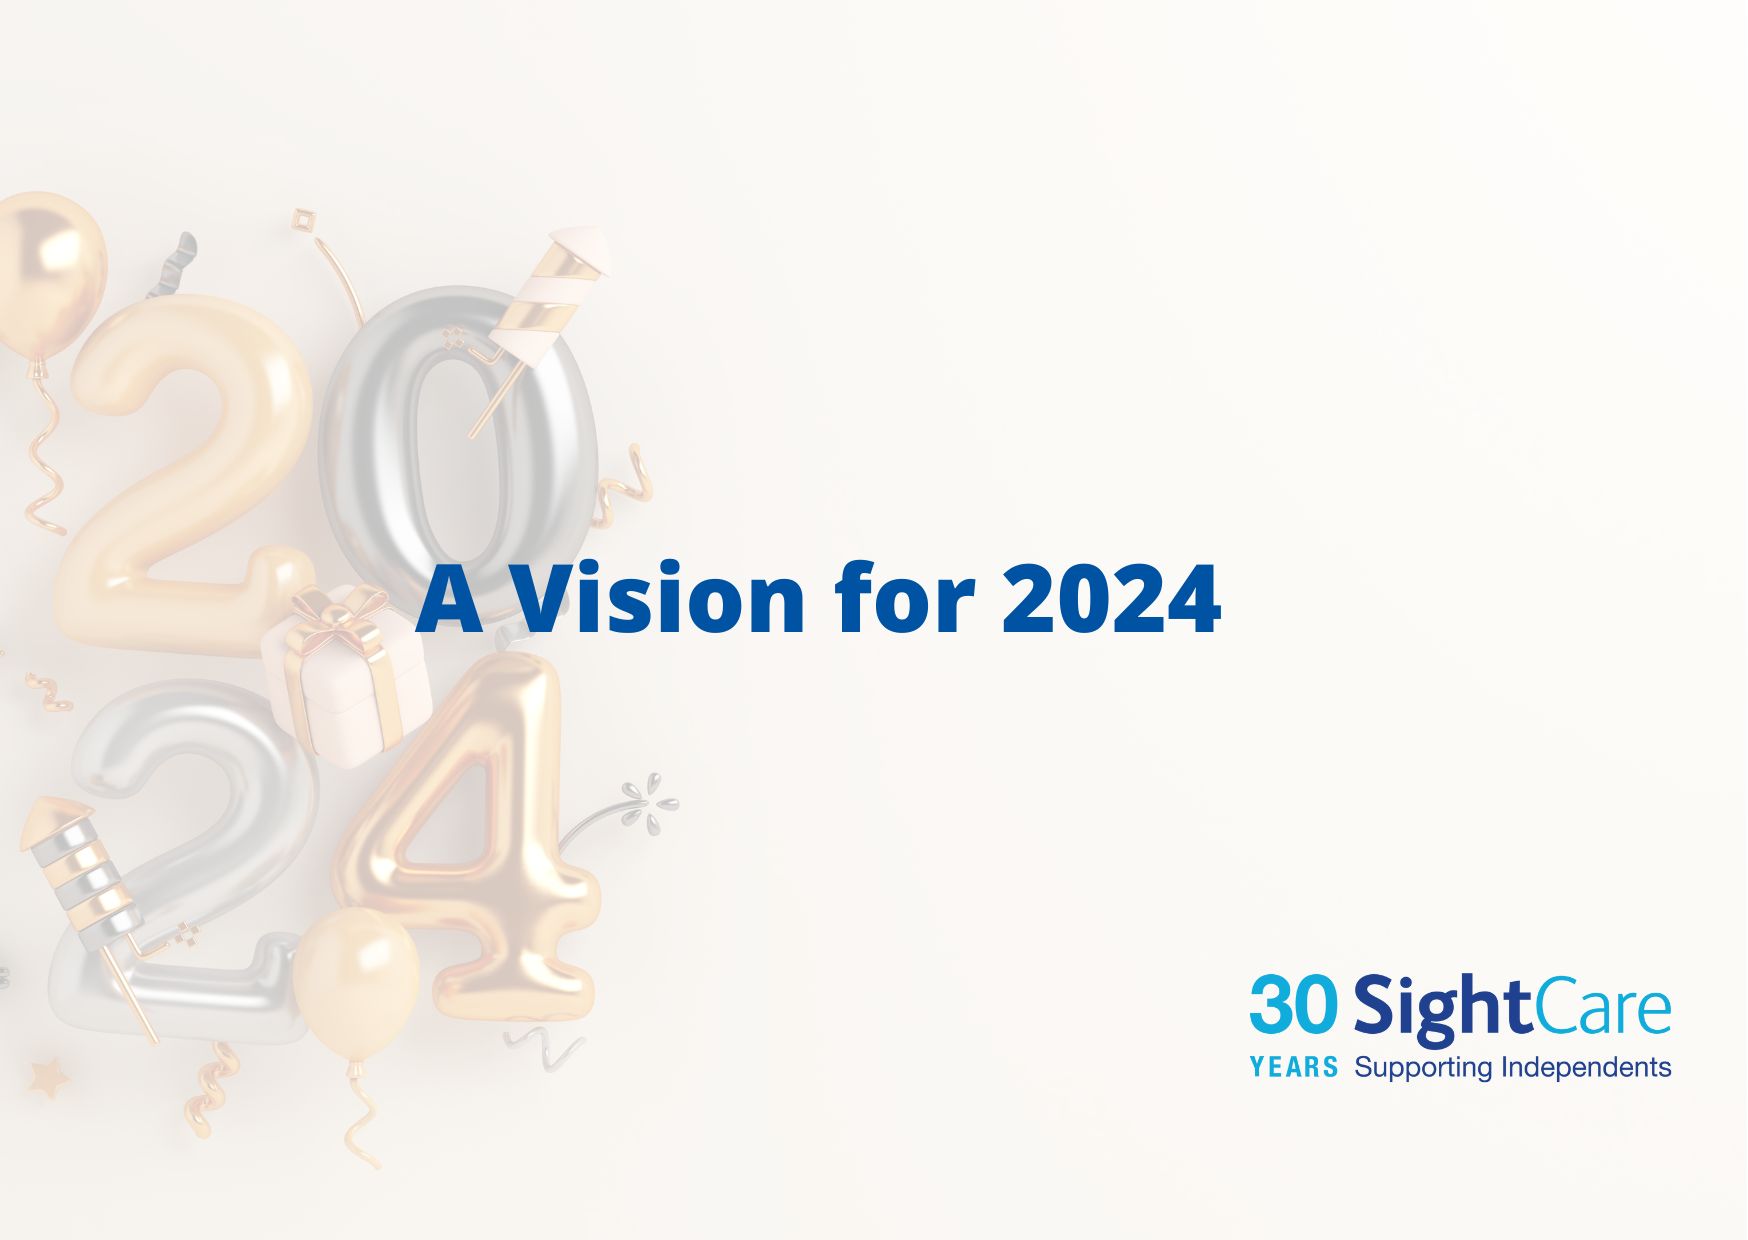 A vision for 2024